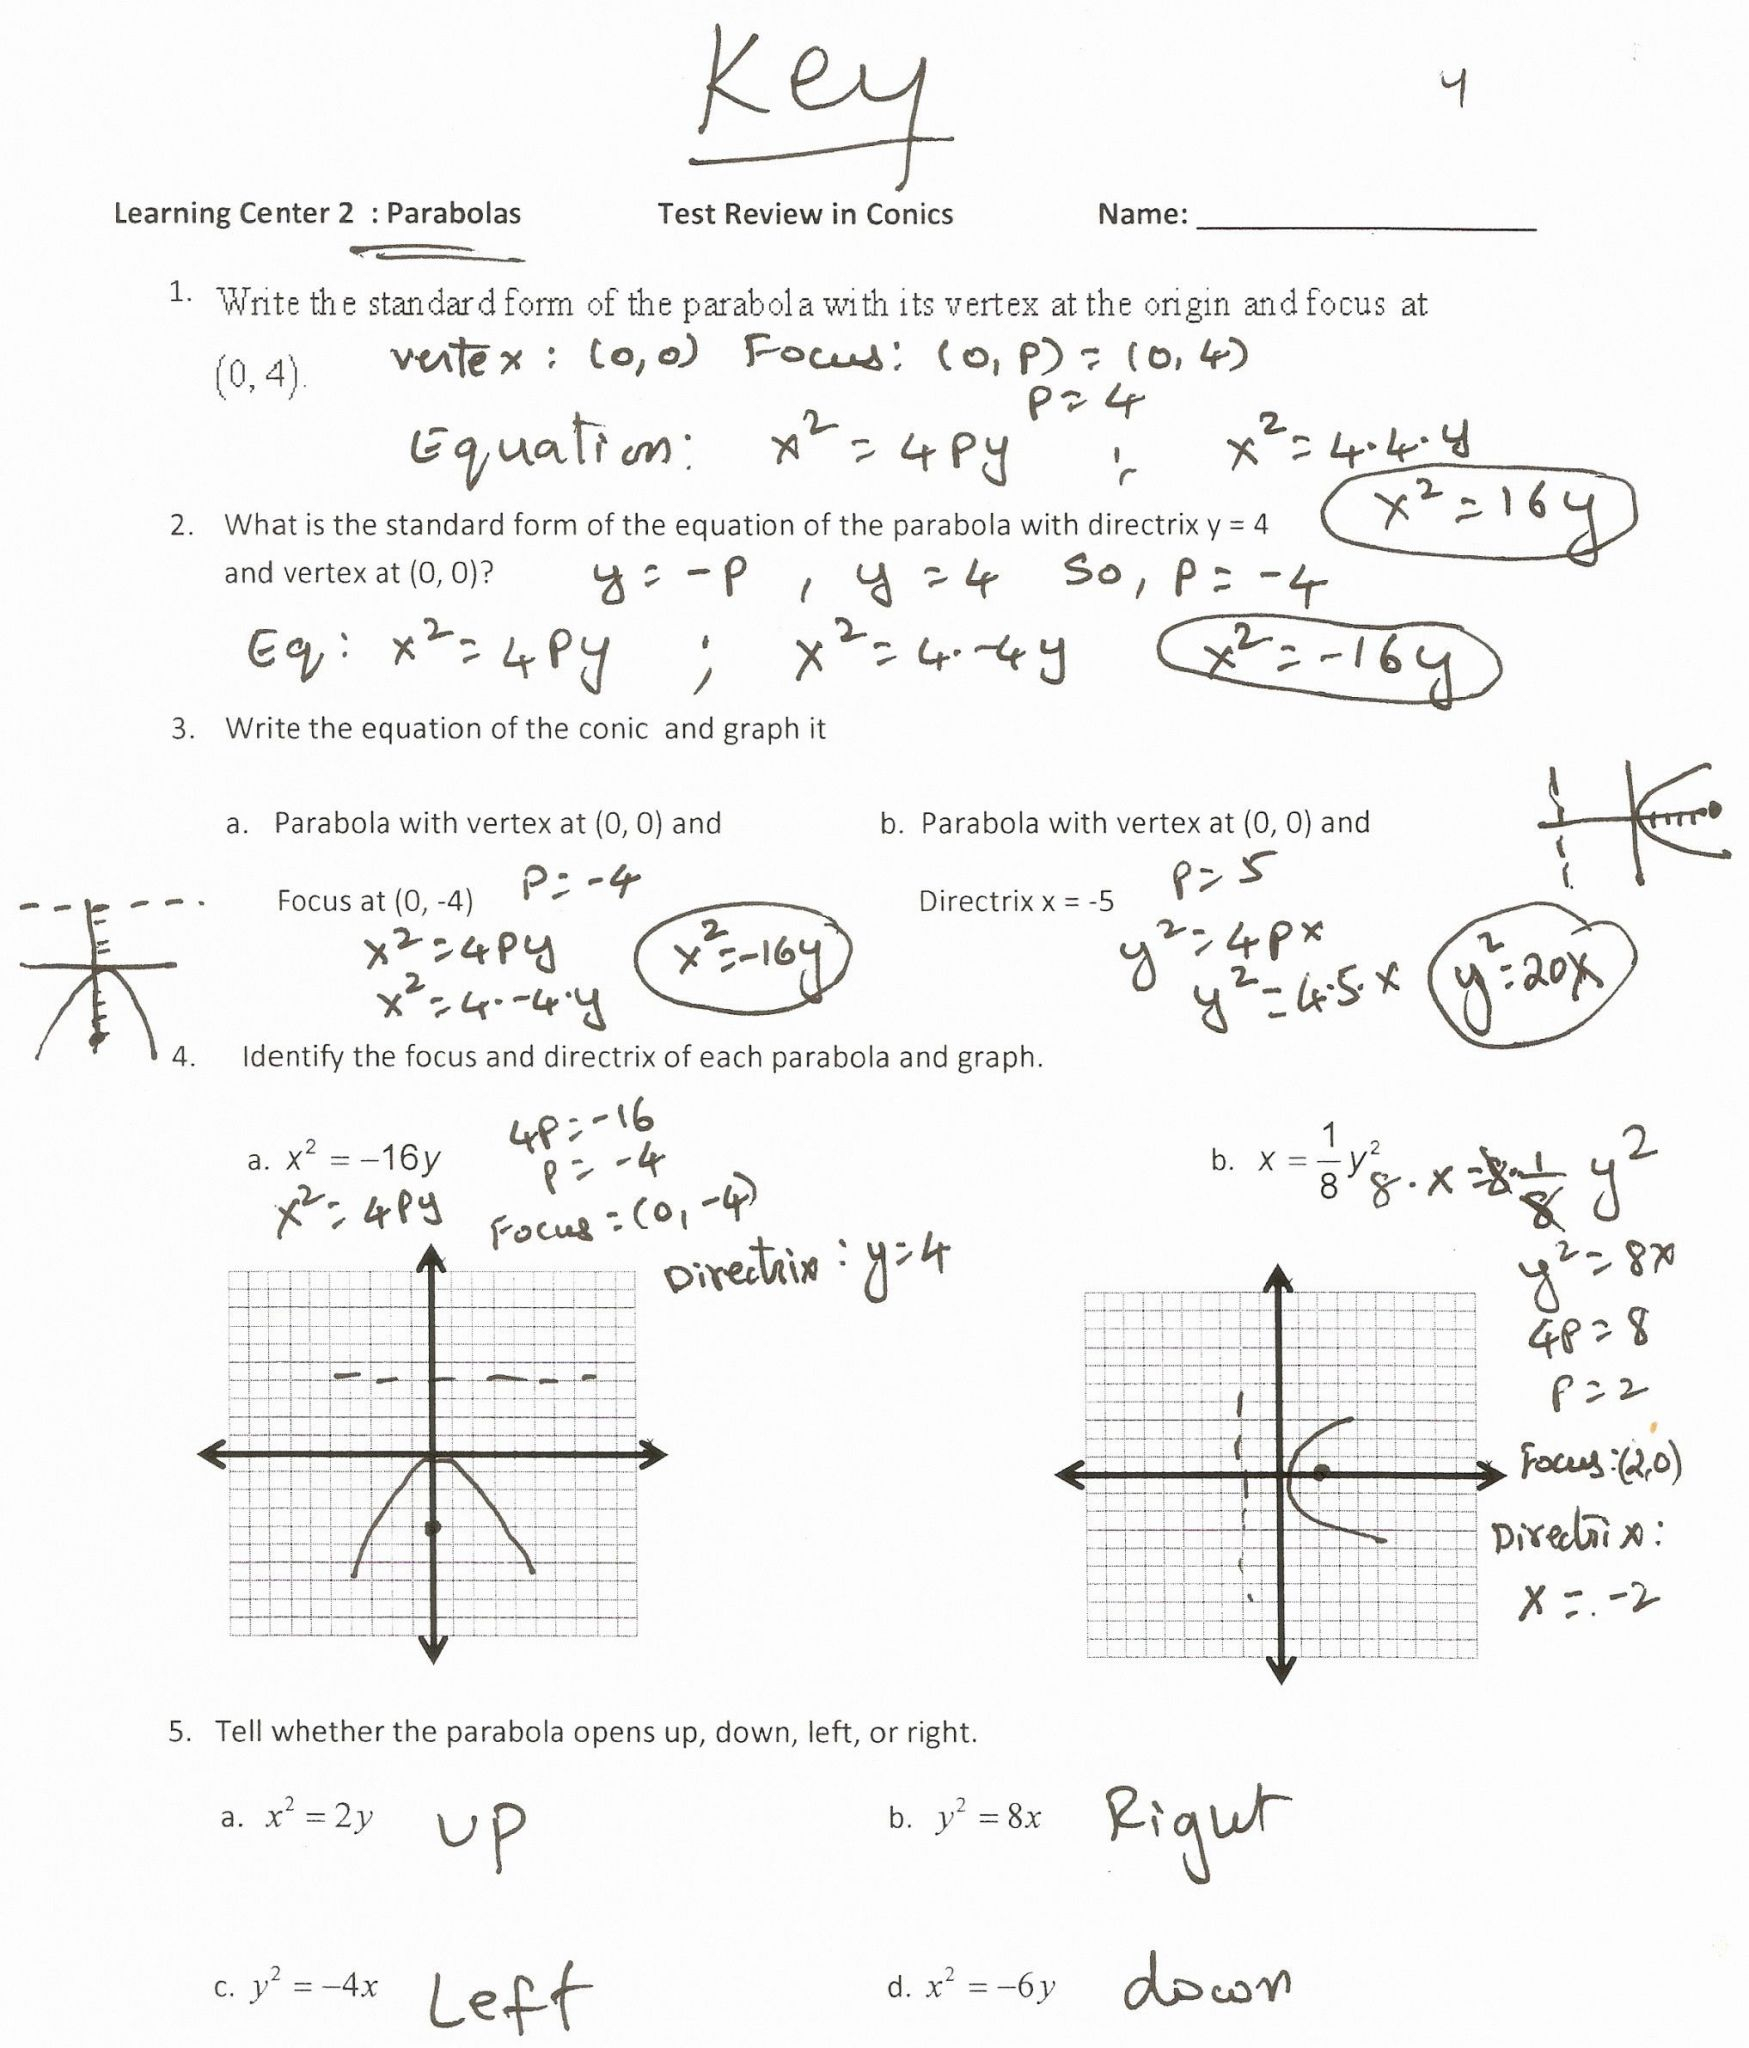 Writing Linear Equations Worksheet Answers Db excel